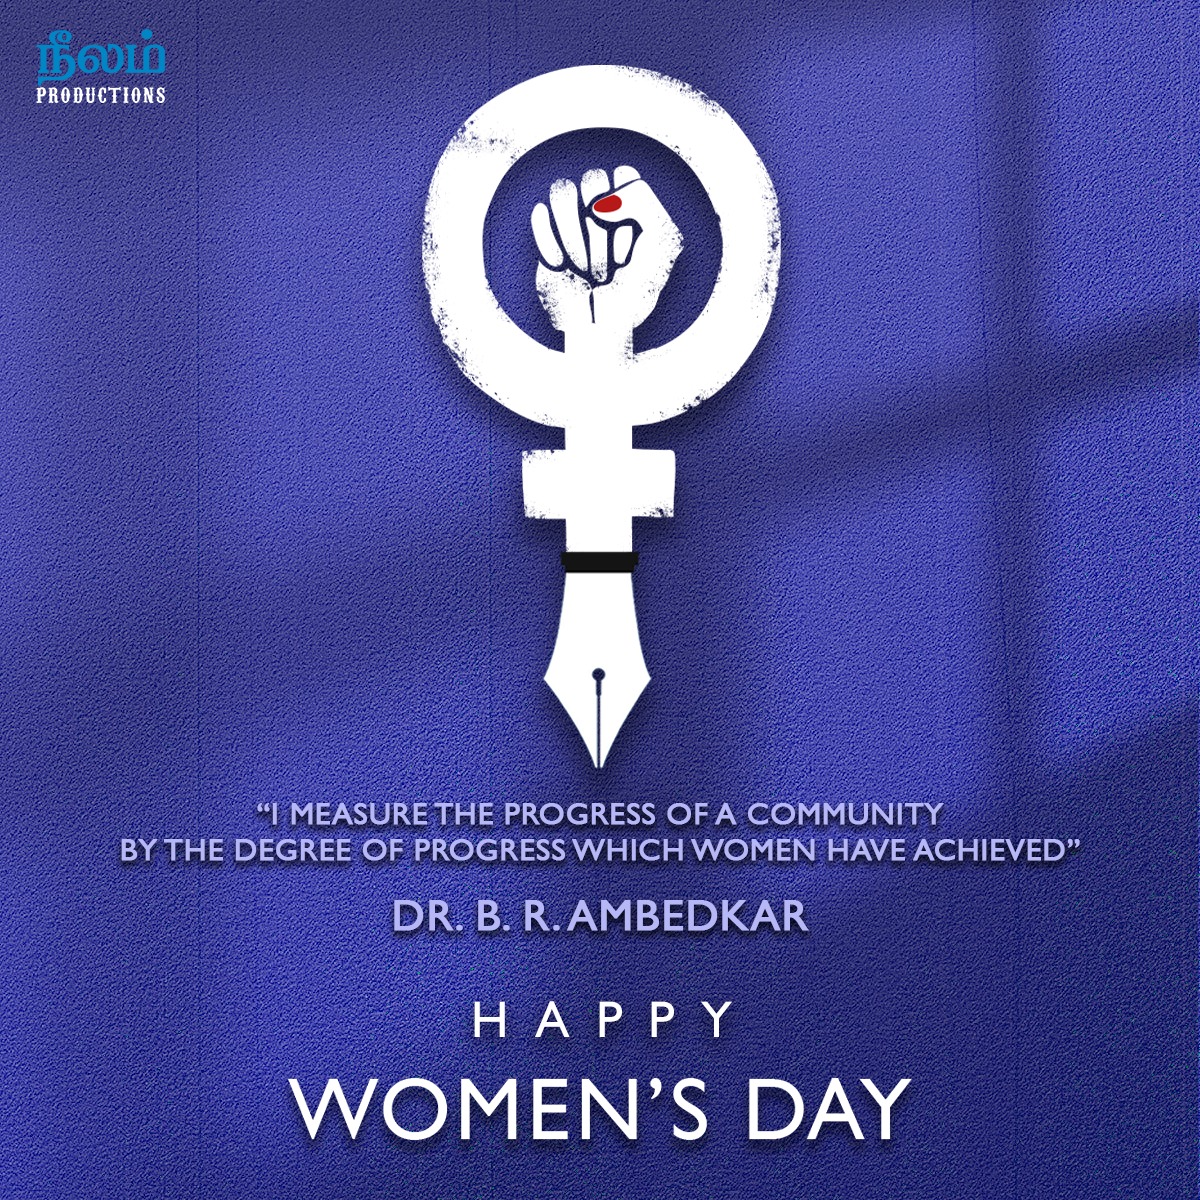 #NeelamProductions wishes all the amazing women a very happy women's day 💙

#WomensDay #InternationalWomensDay